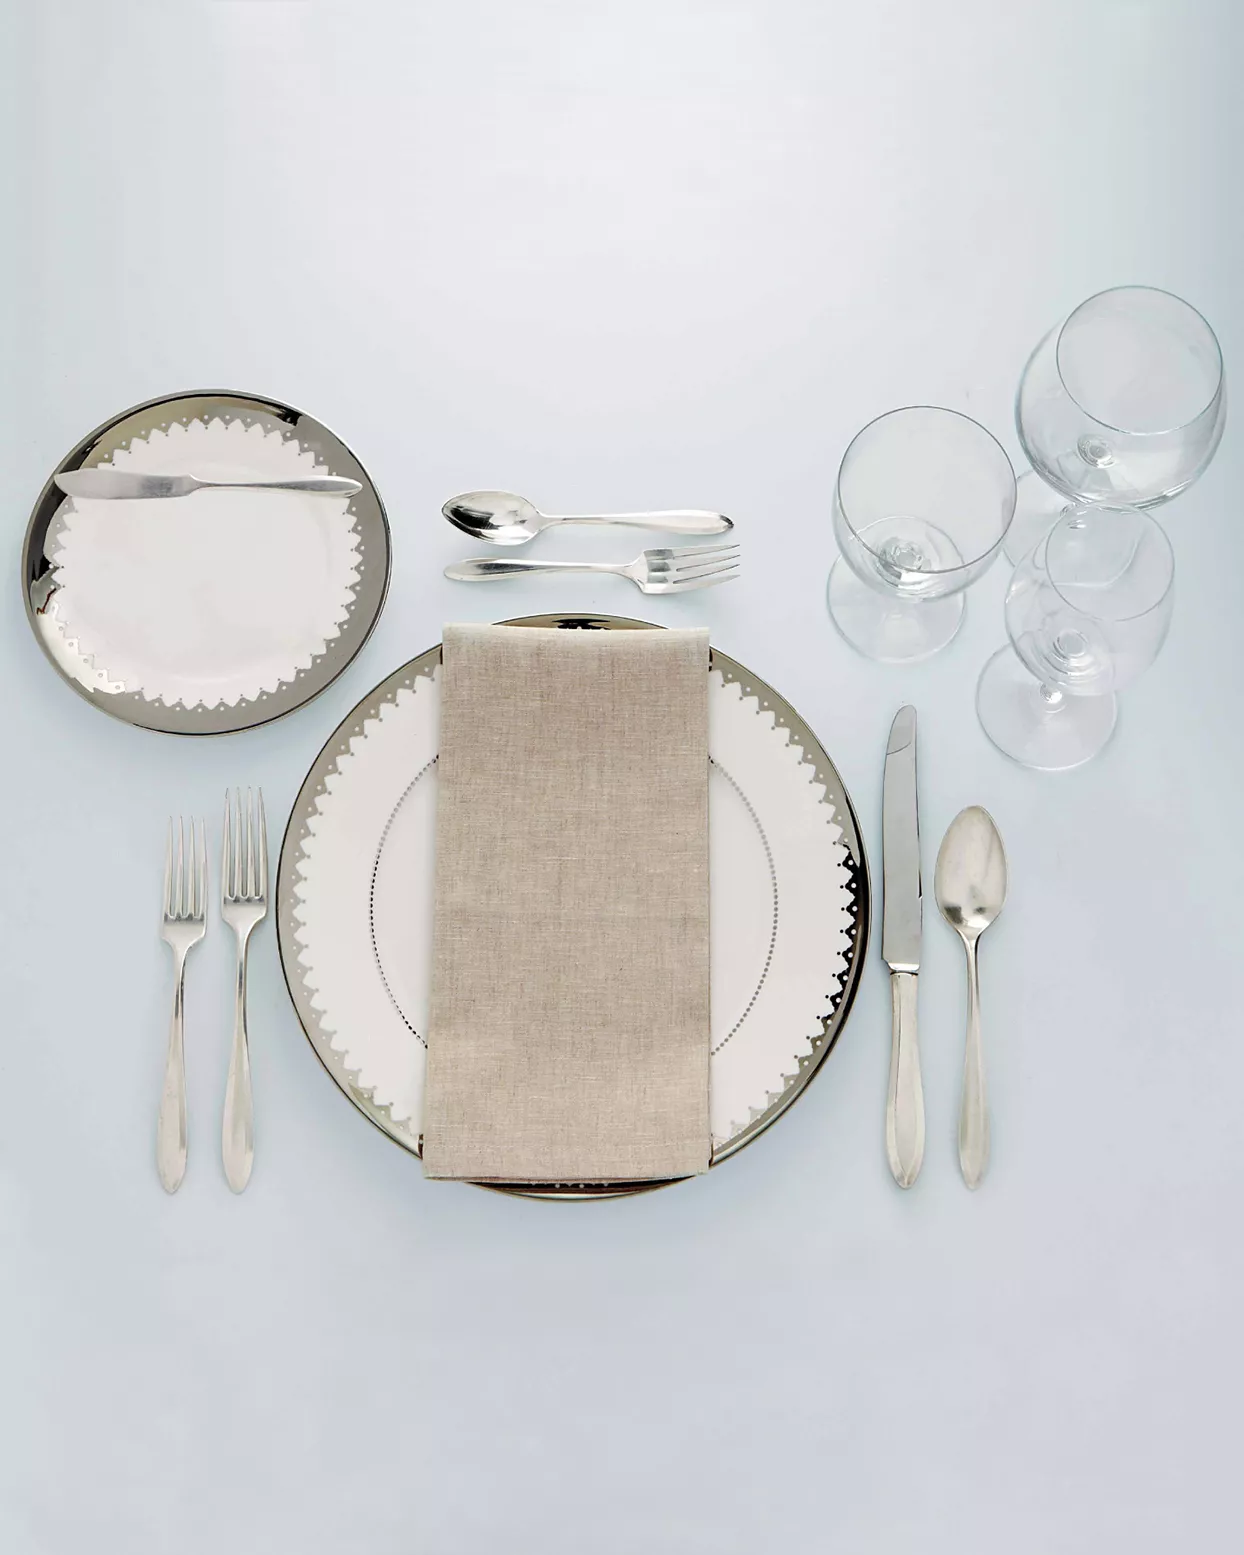 silver and white place setting on blue table